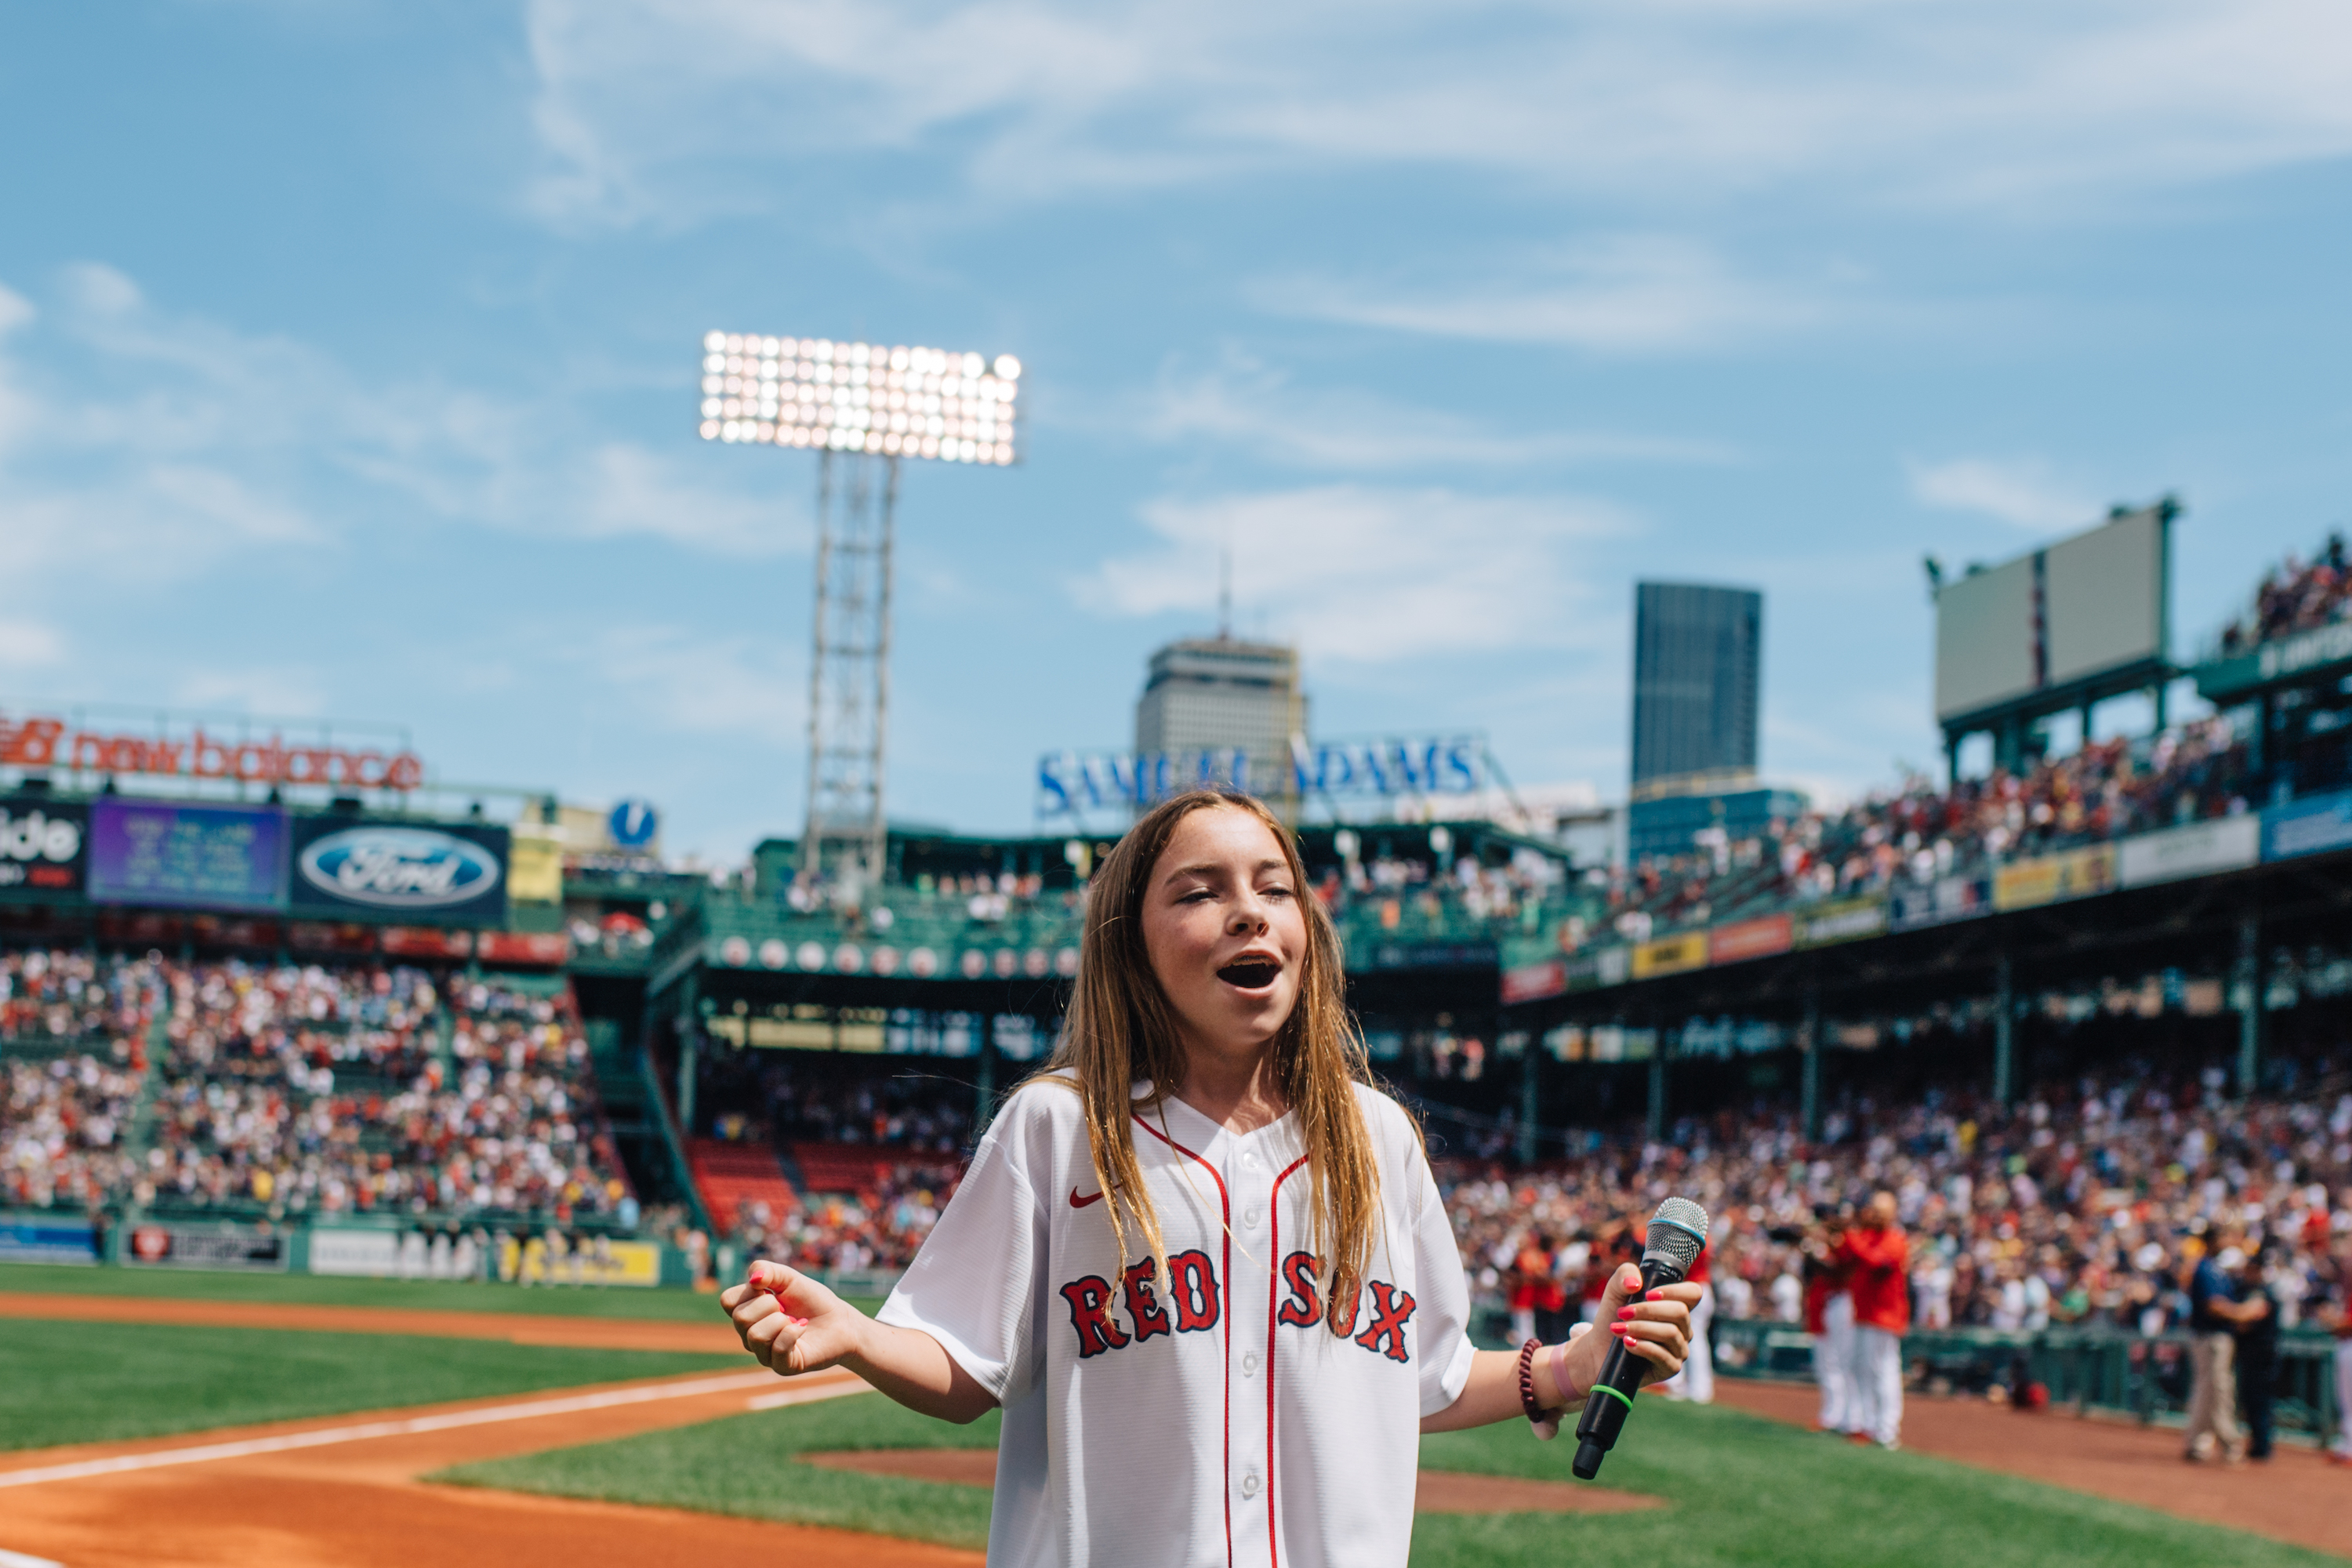 A girl wears a Red Sox jersey and holds a microphone, singing in Fenway Park.